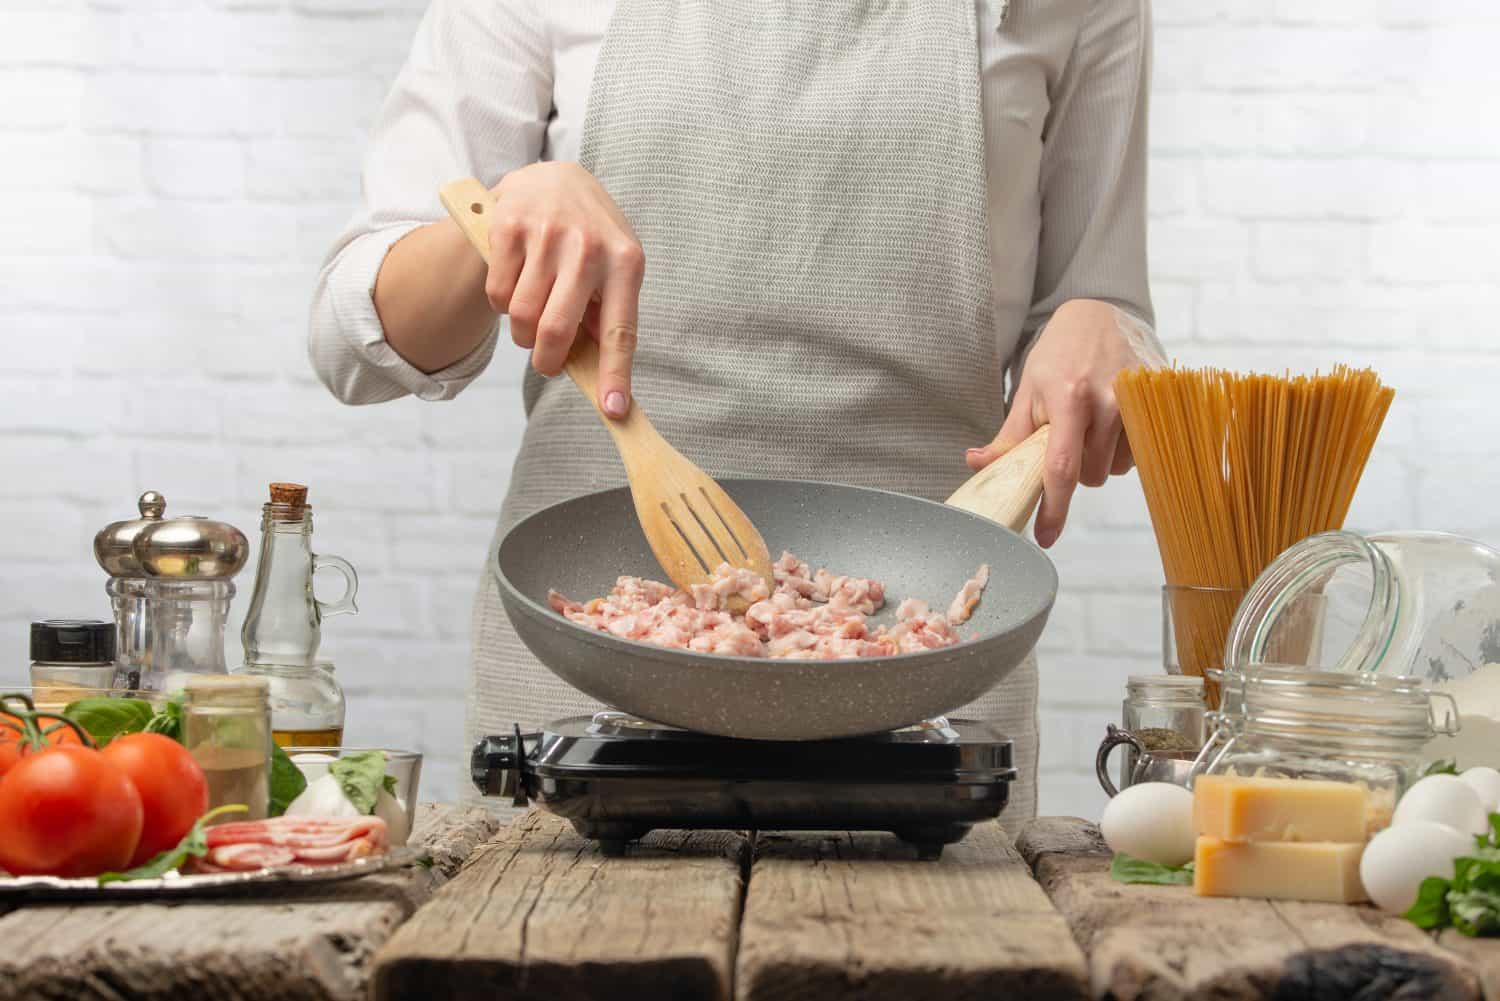 Chef fry bacon for cooking. Culinary recipes, restaurant business, menu